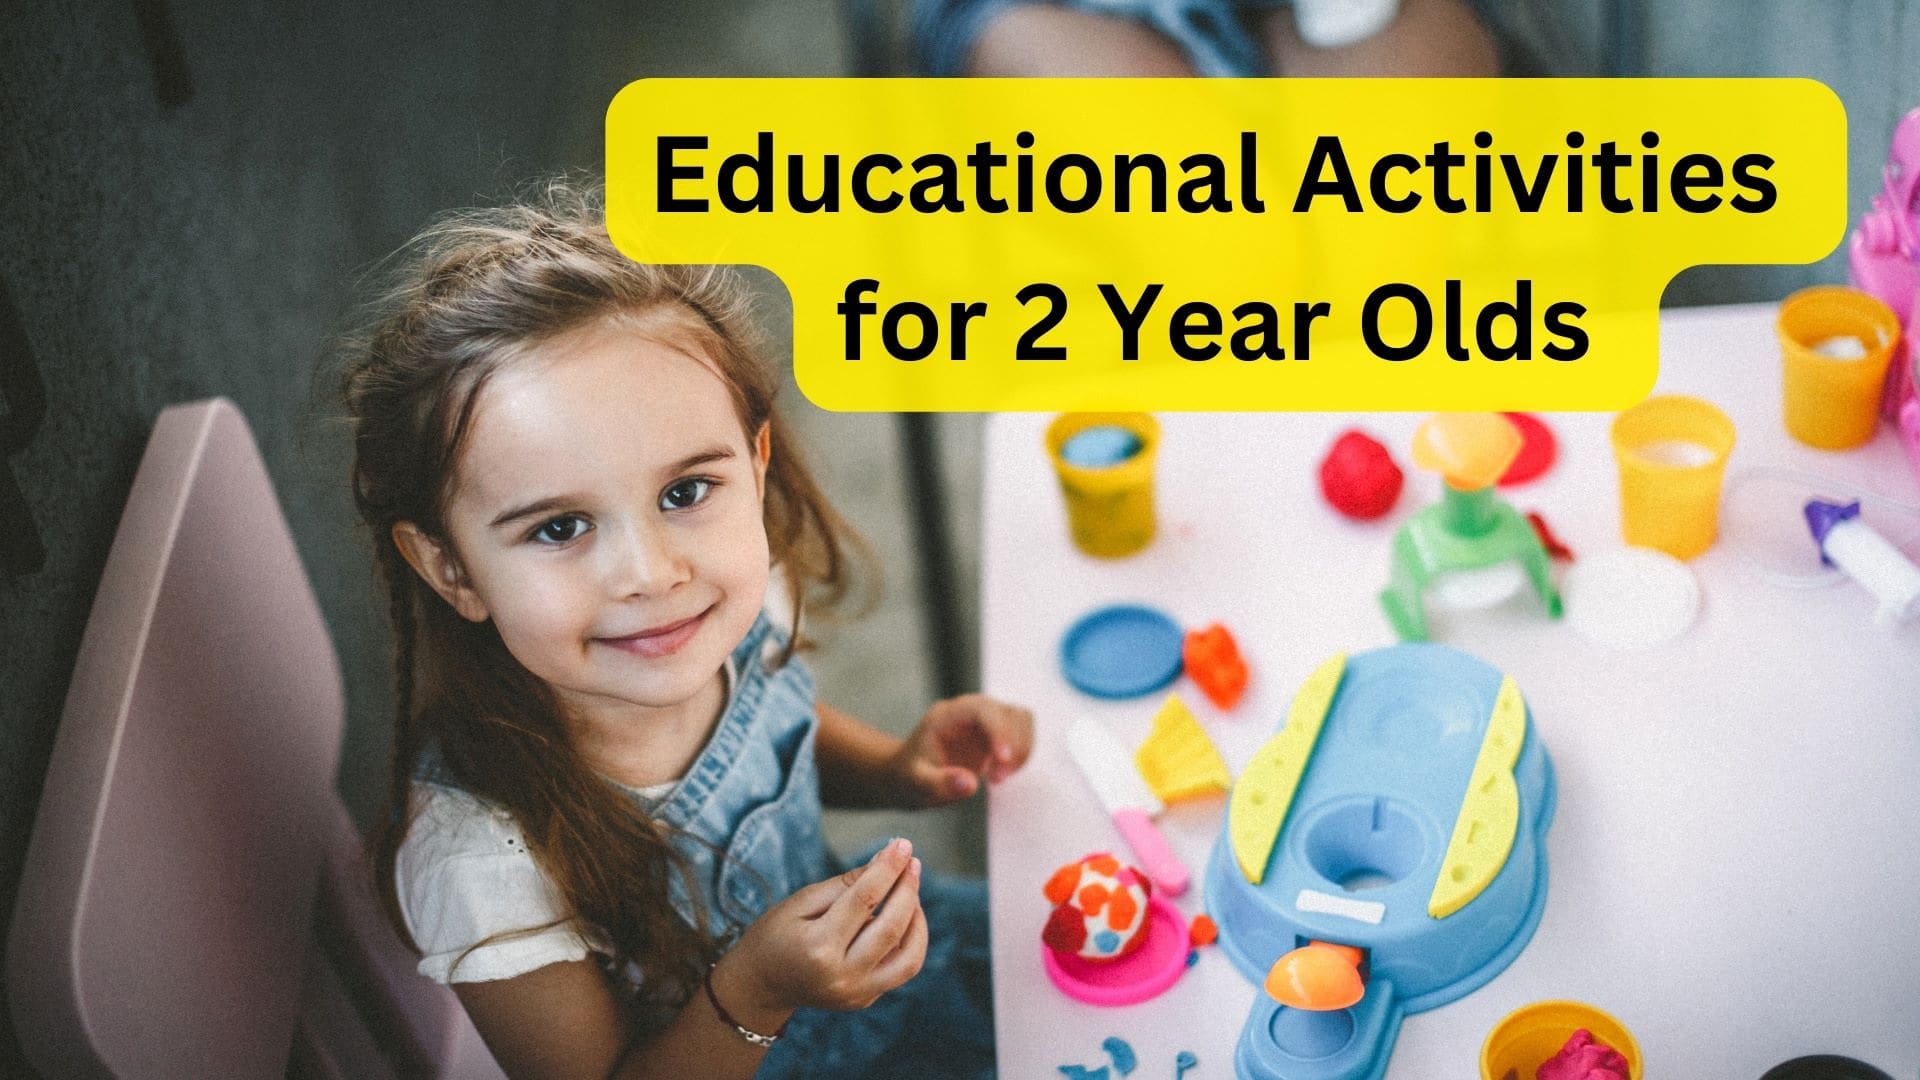 Top Educational Activities for 2 Year Olds at Home